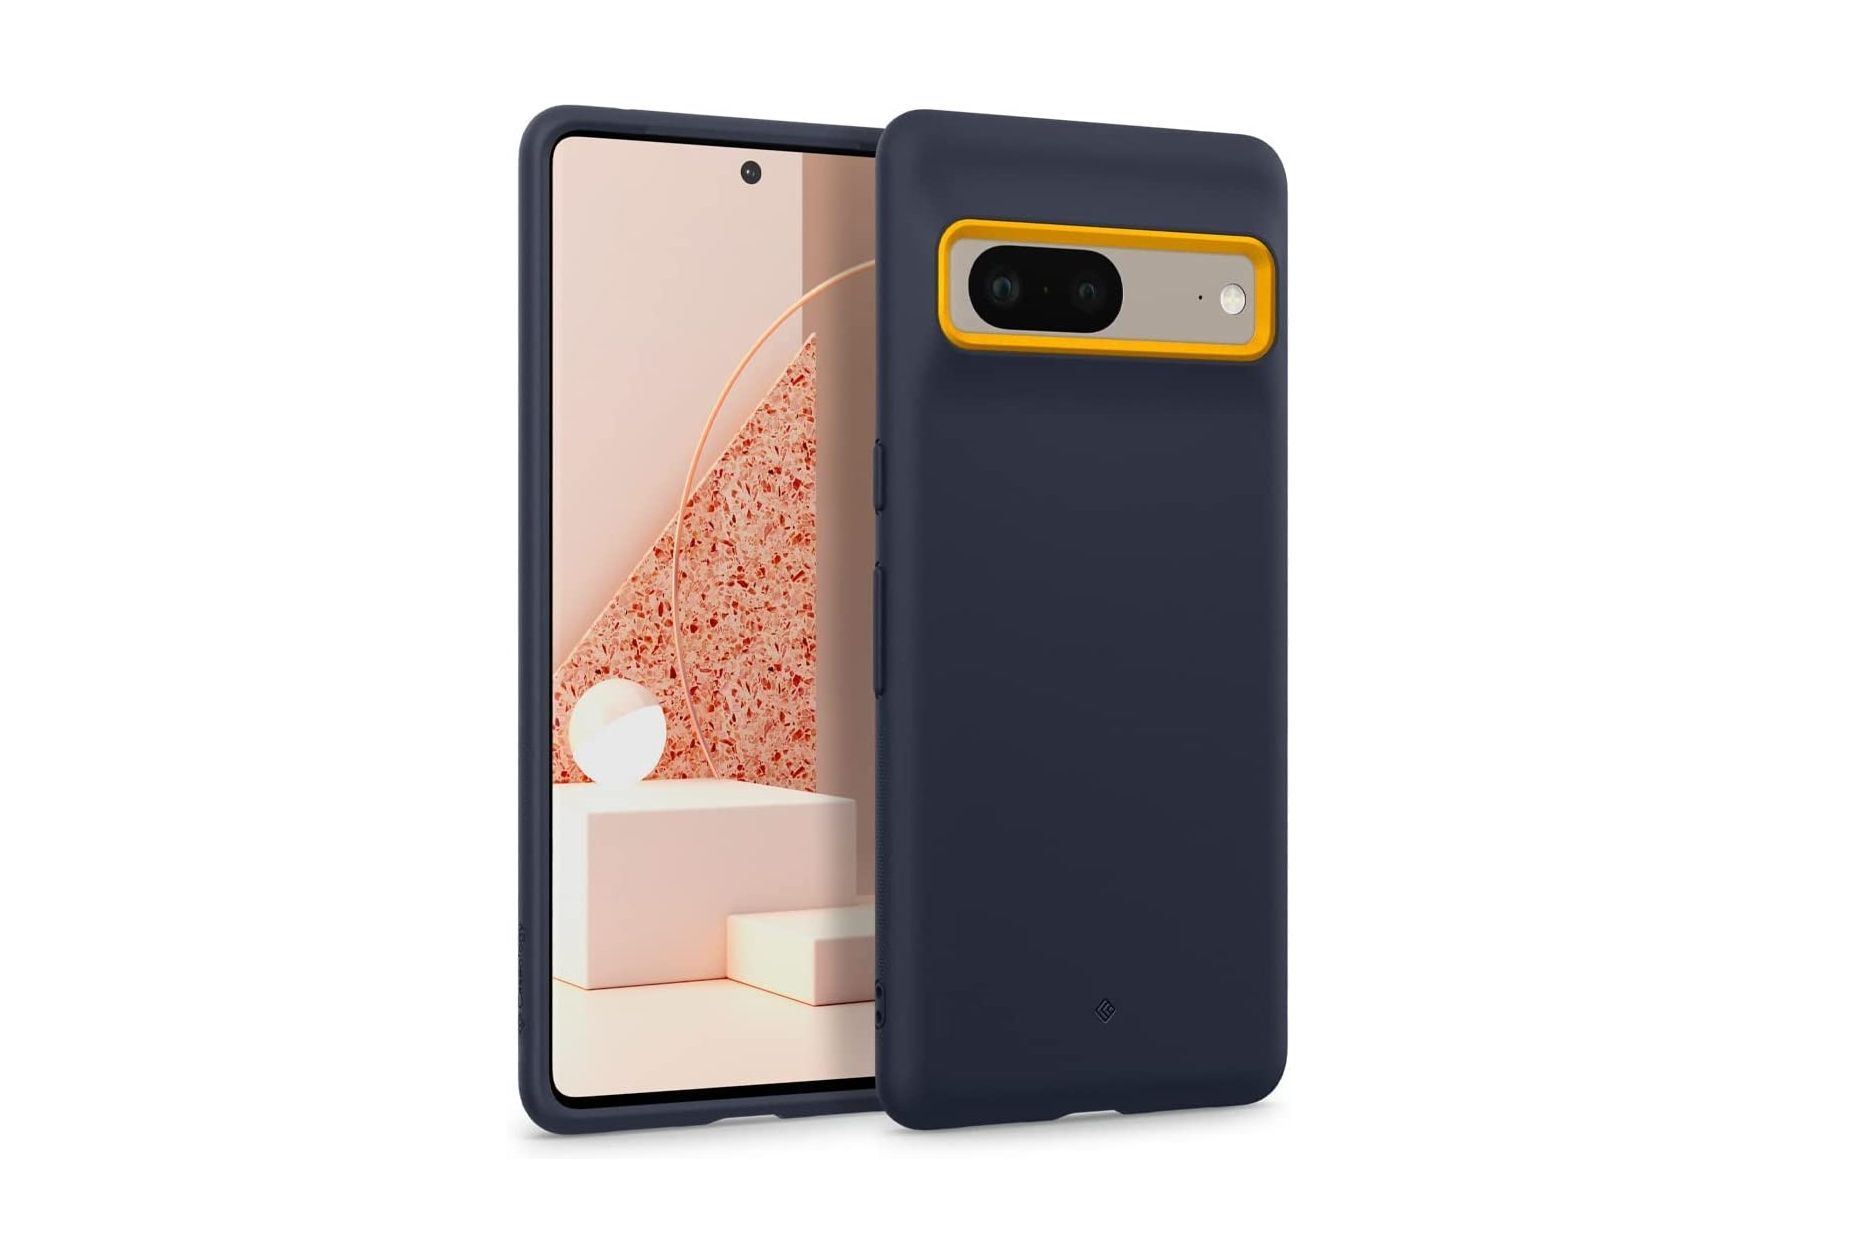 The Caseology Nano Pop Google Pixel 7 Series Case is slim but durable&quot;&amp;nbsp - The best Pixel 7 and Pixel 7 Pro cases - our top picks